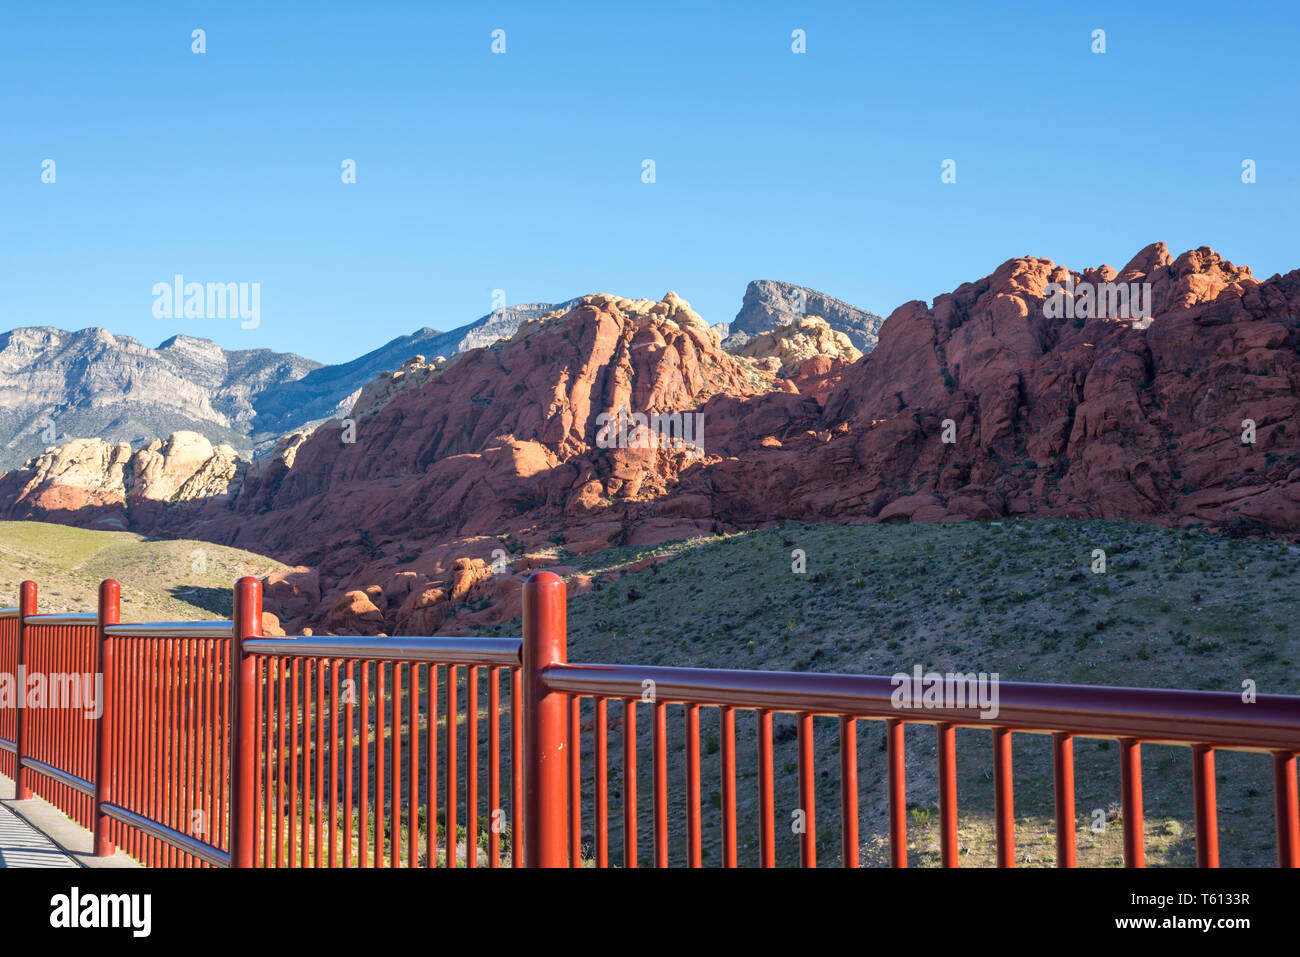 Nature landscape at Red Rock Canyon National Conservation Area. Las Vegas, Nevada, USA. Stock Photo